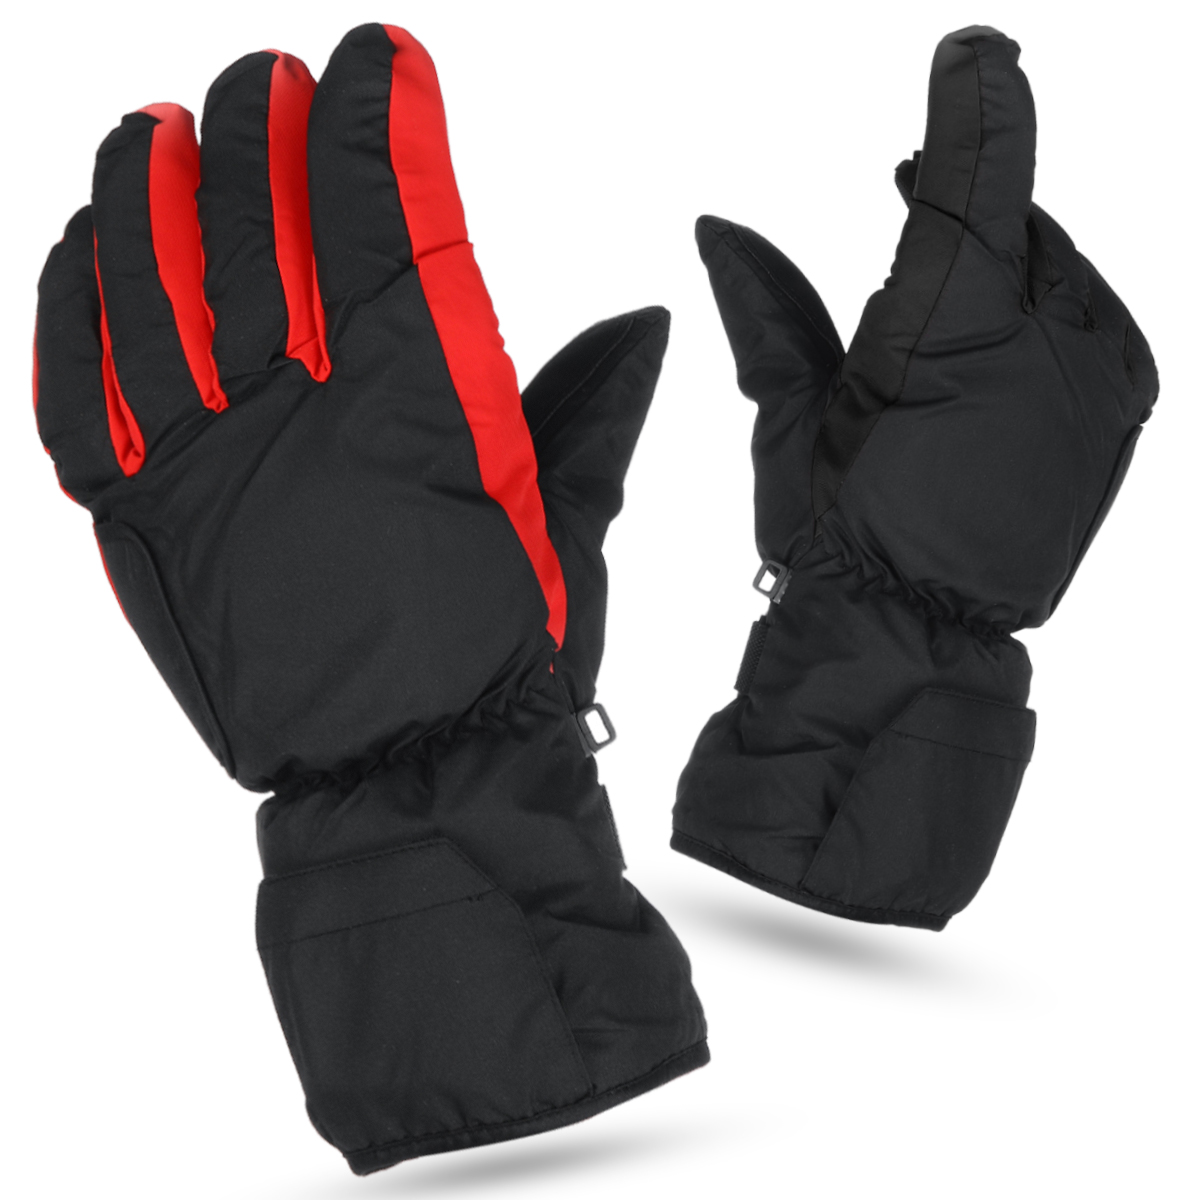 45V-Smart-Electric-Heated-Gloves-Winter-Ski-Cycling-Keep-Warm-Battery-Powered-Heating-Gloves-5-Finge-1771505-6